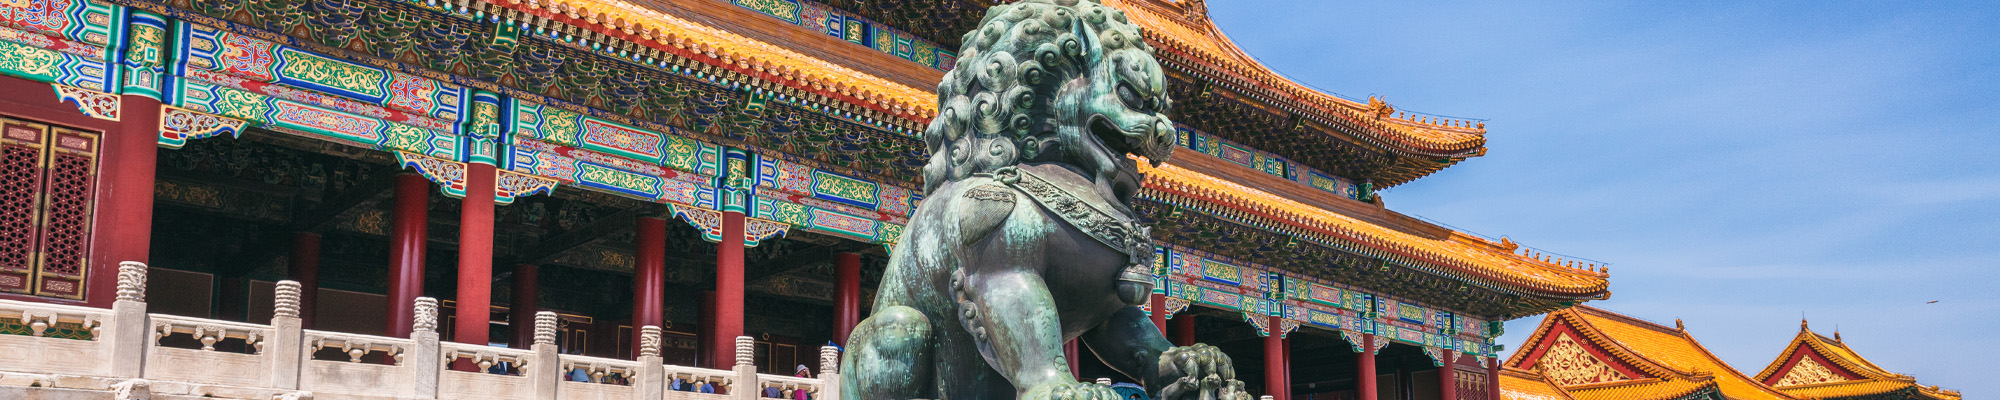 lion statue outside the Forbidden City, Beijing, China